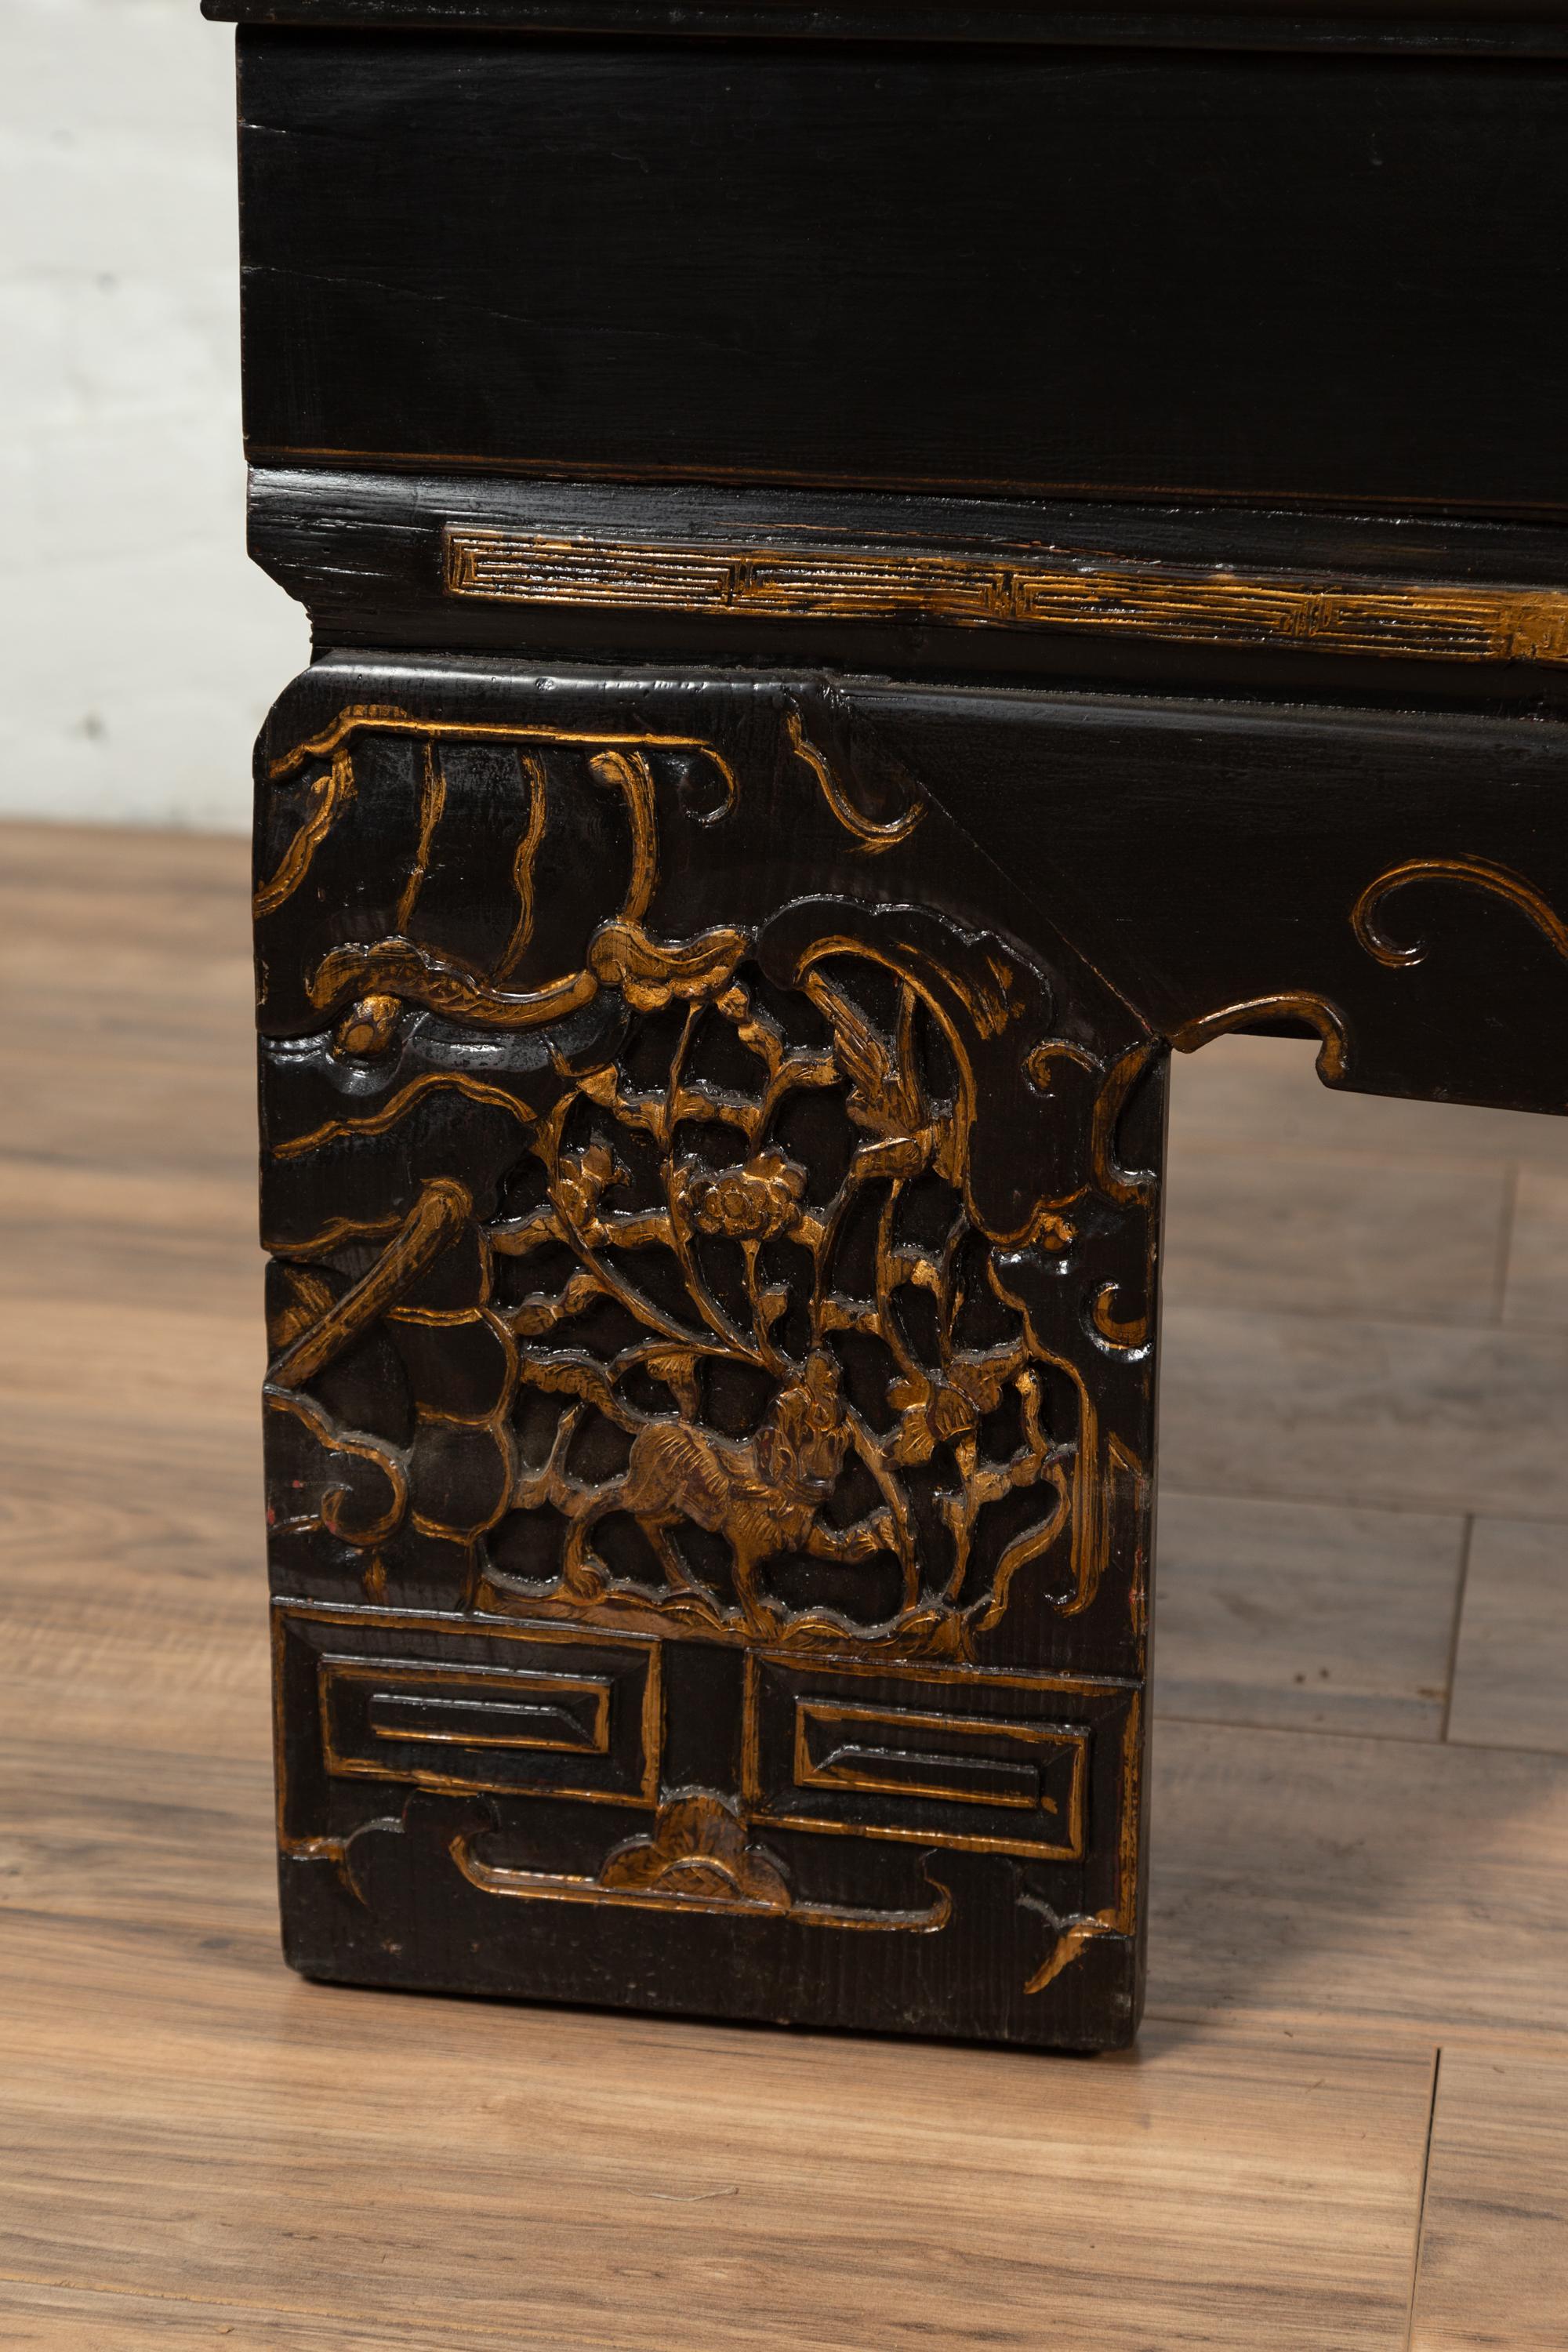 Ming Antique Chinese Black Lacquered Bench with Hidden Storage, Rattan and Gilt Décor